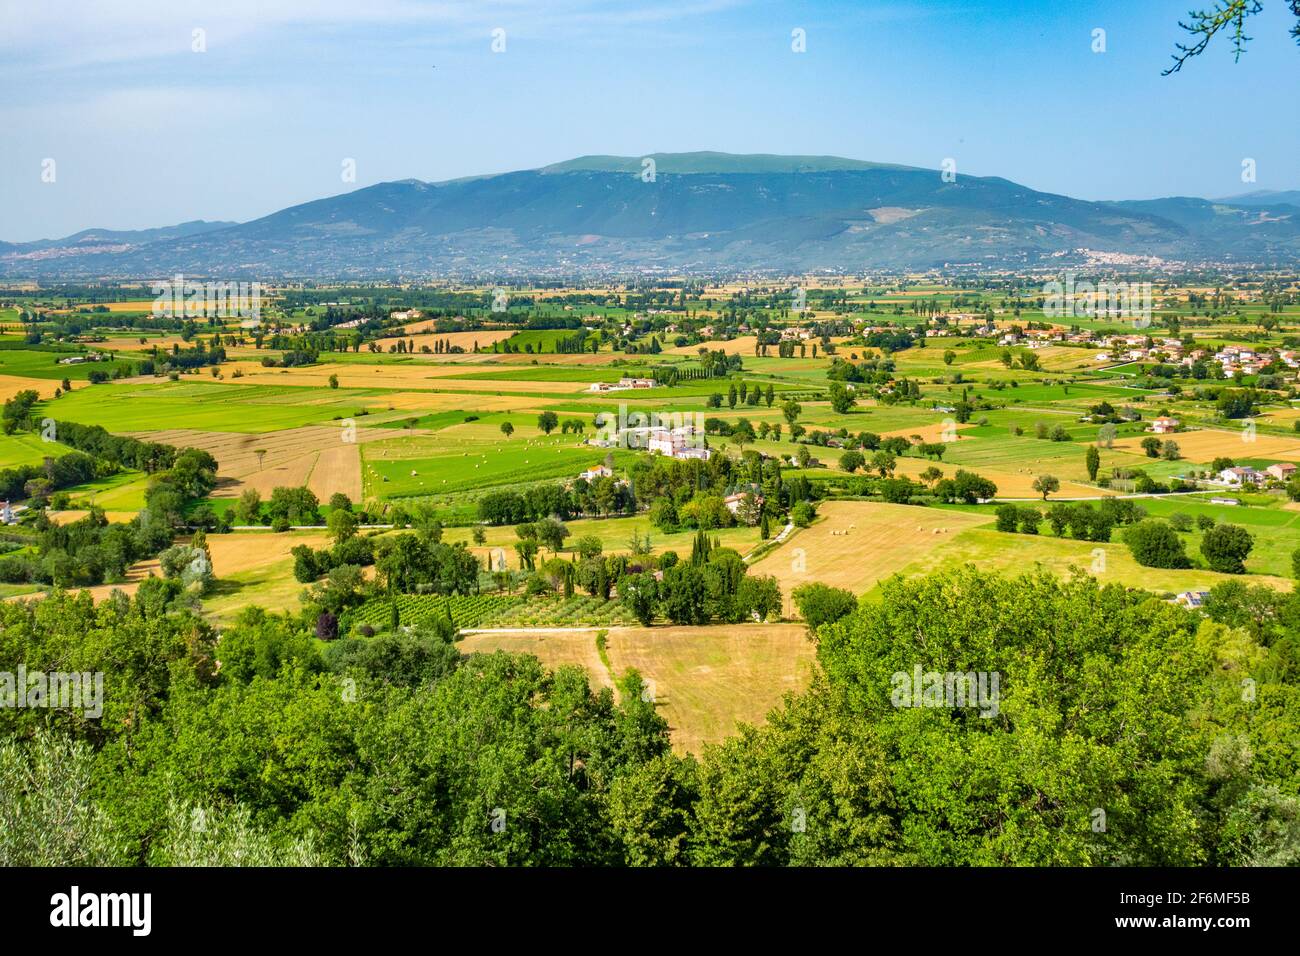 The Spoleto plain from the town of Gualdo Cattaneo, Terni, Umbria, with Assisi in the distance Stock Photo